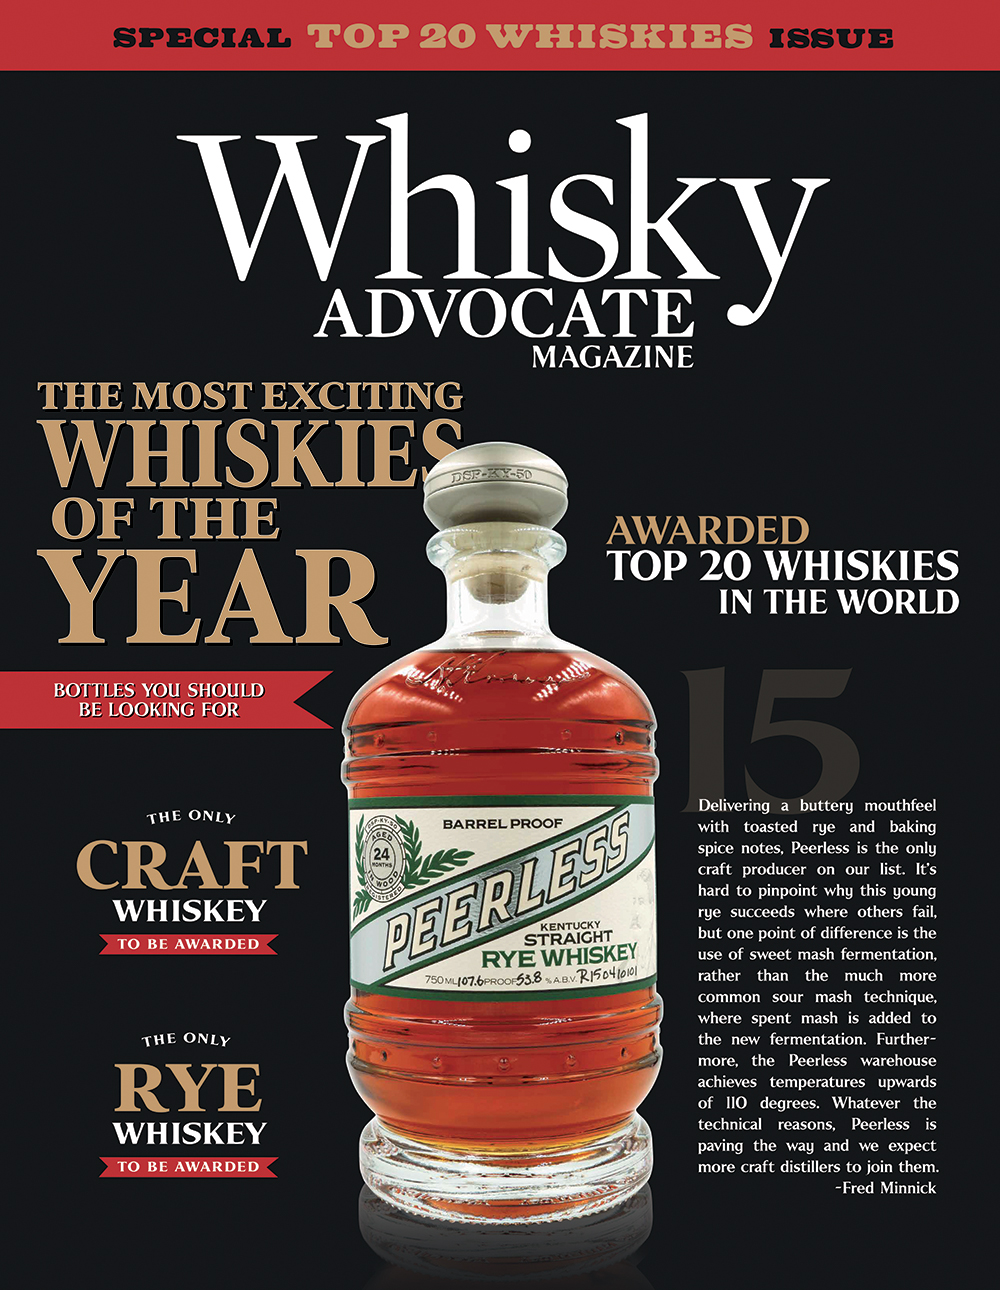 Top 20 whiskies across the world